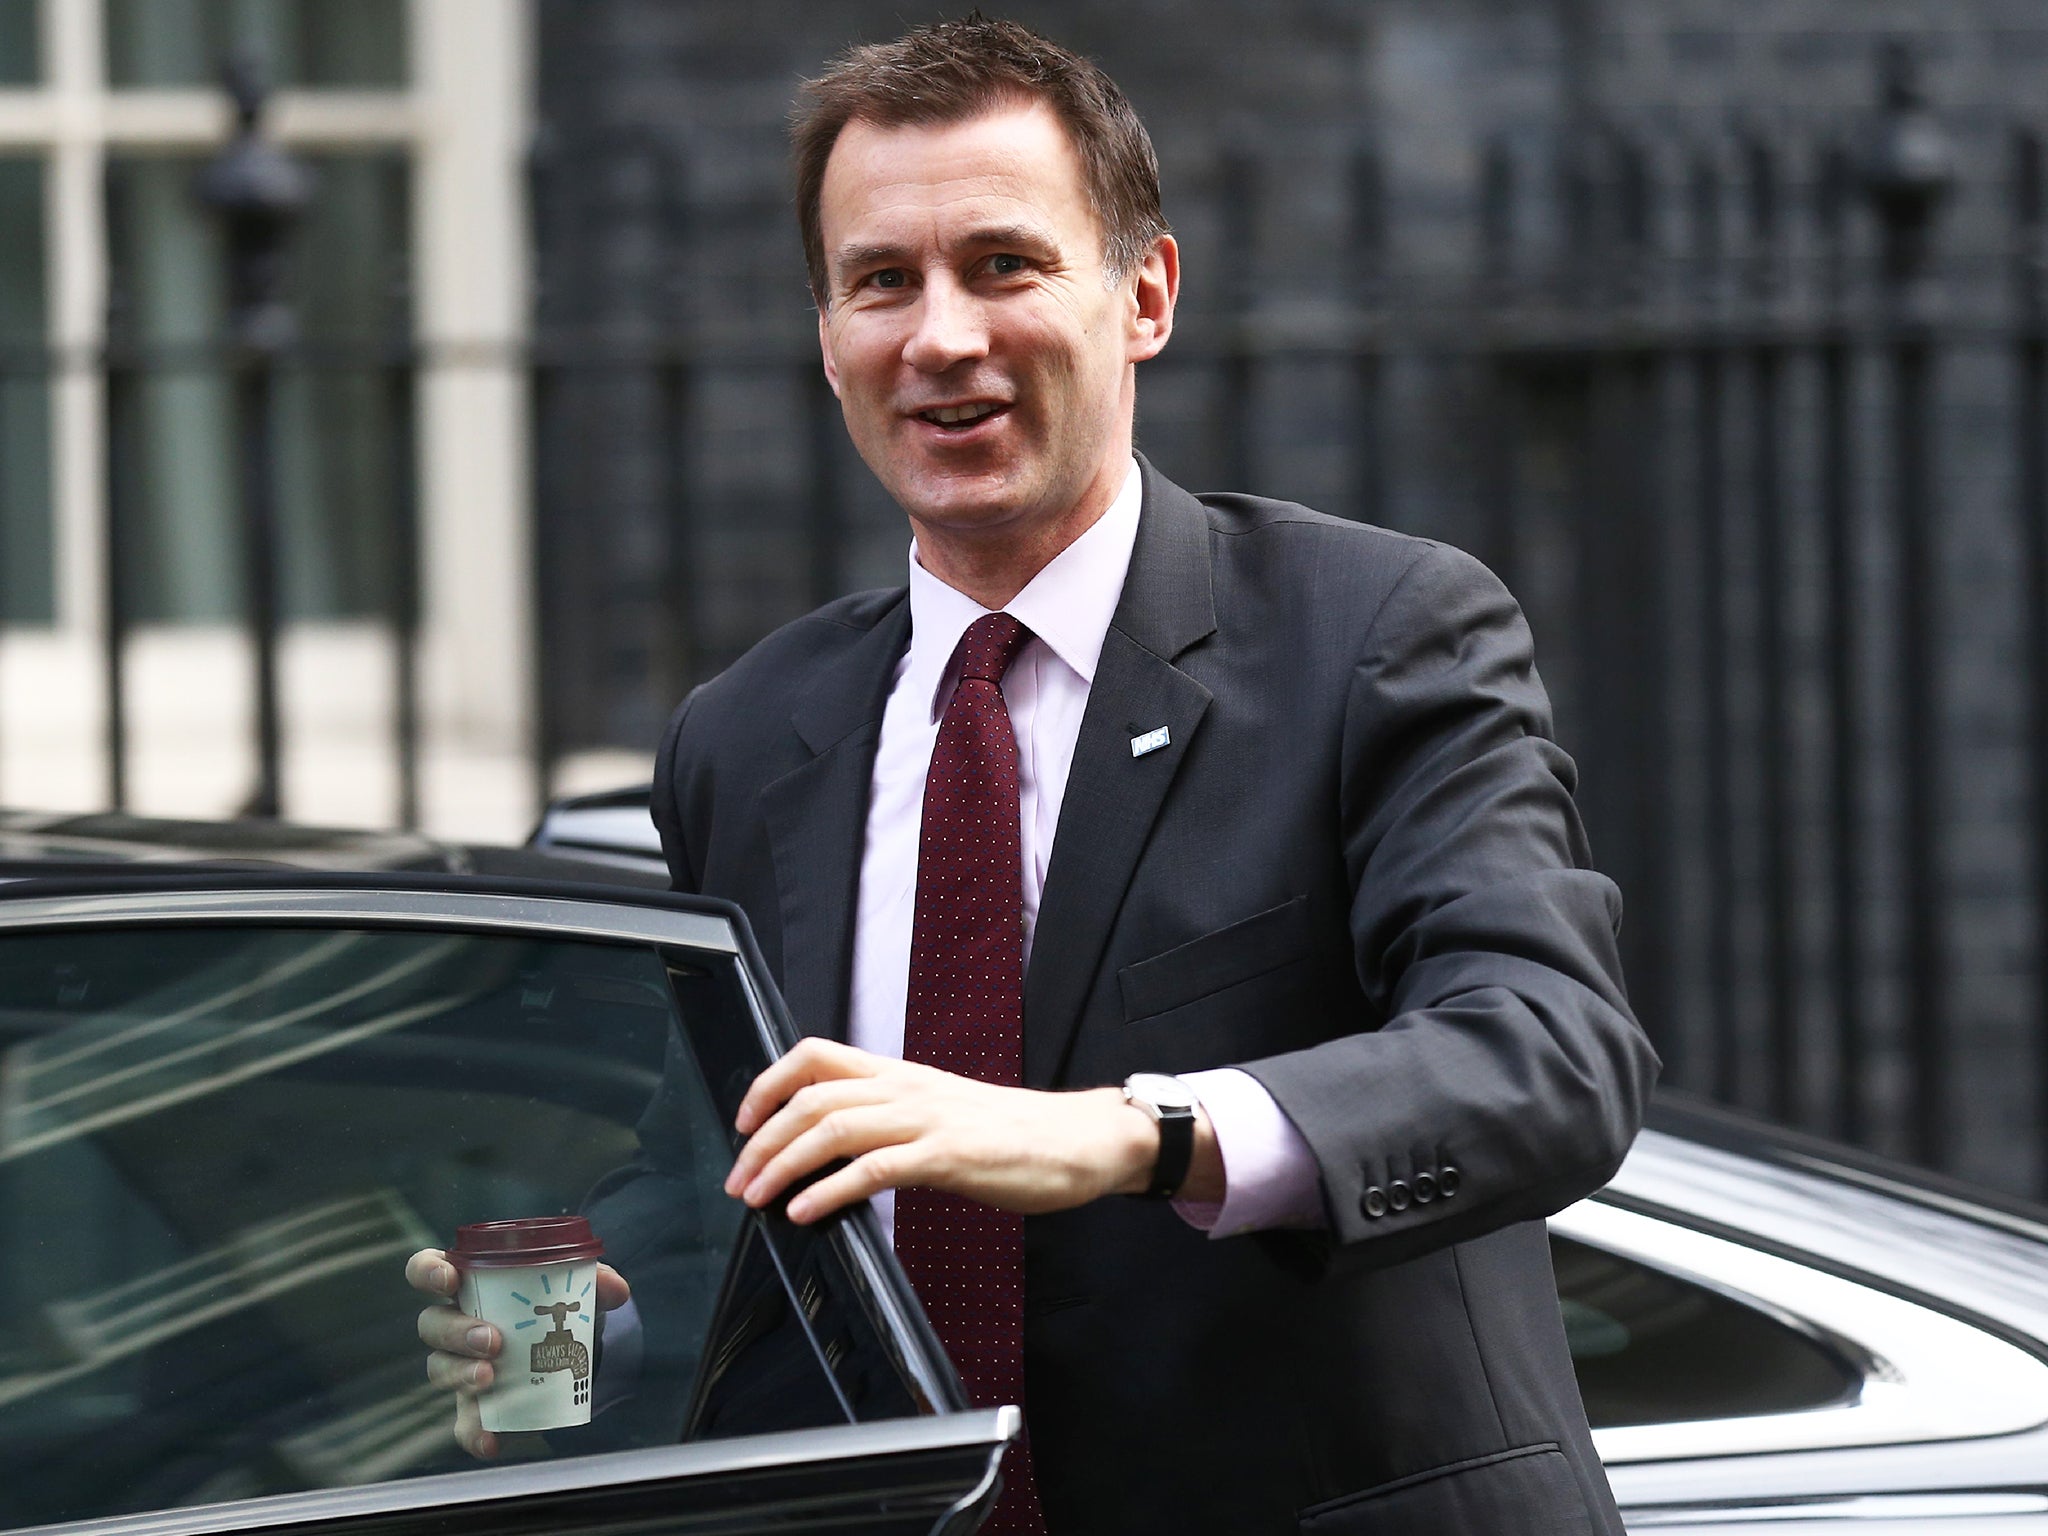 Jeremy Hunt described the deal as a 'definitive step forward' for the NHS